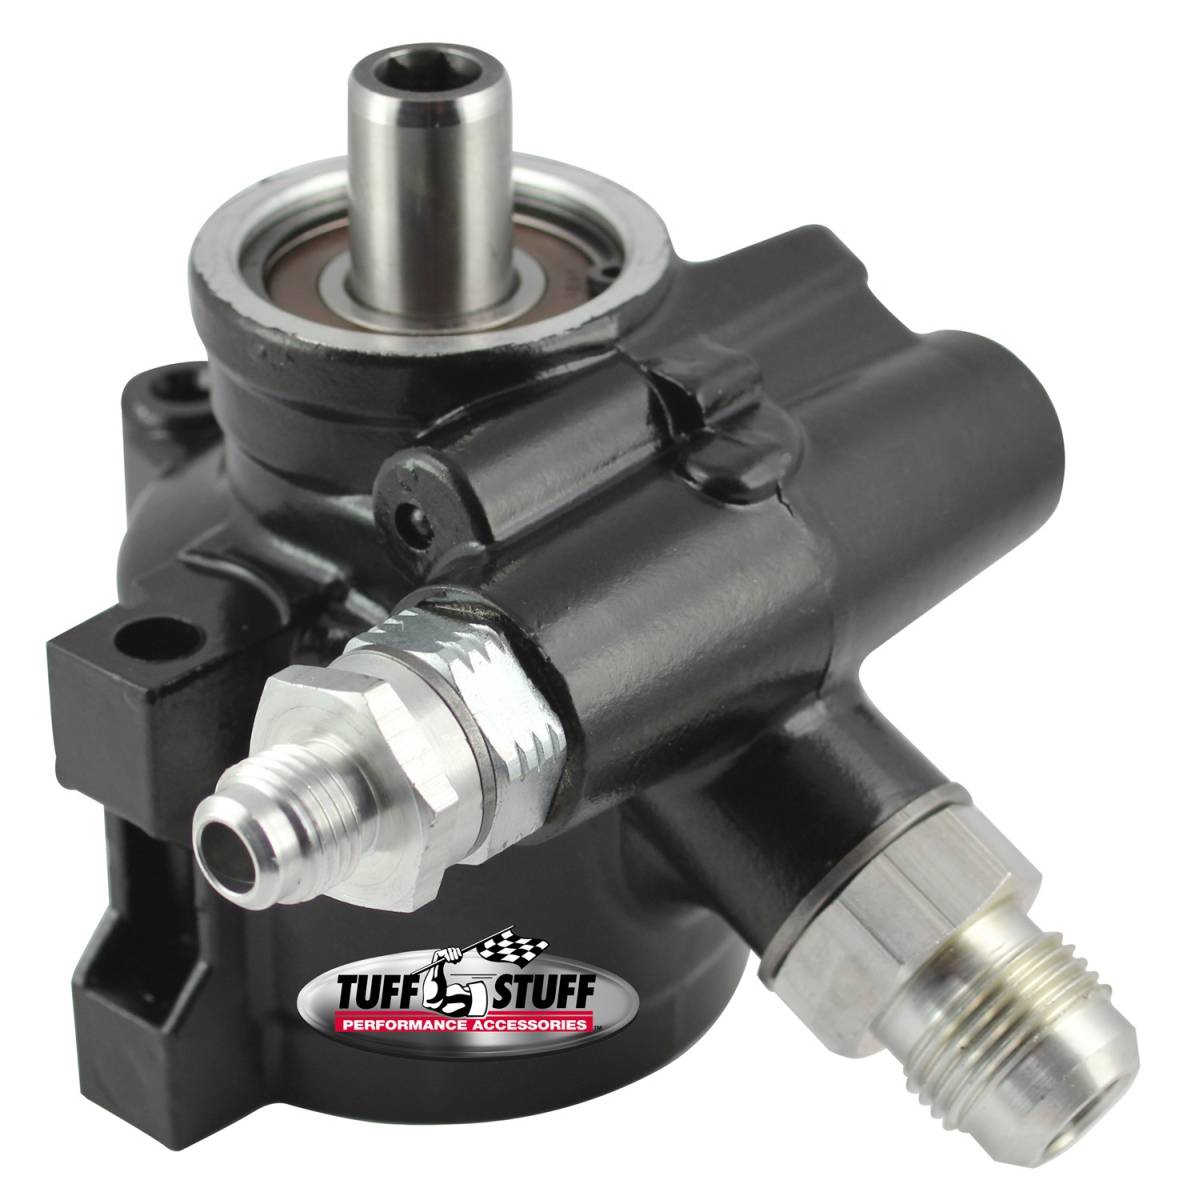 Tuff Stuff Performance - Type II Alum. Power Steering Pump AN-6 And AN-10 Fitting M8x1.25 Threaded Hole Mounting Btm Pressure Port For Street Rods/Custom Vehicles w/Limited Engine Space Black 6170ALB-2